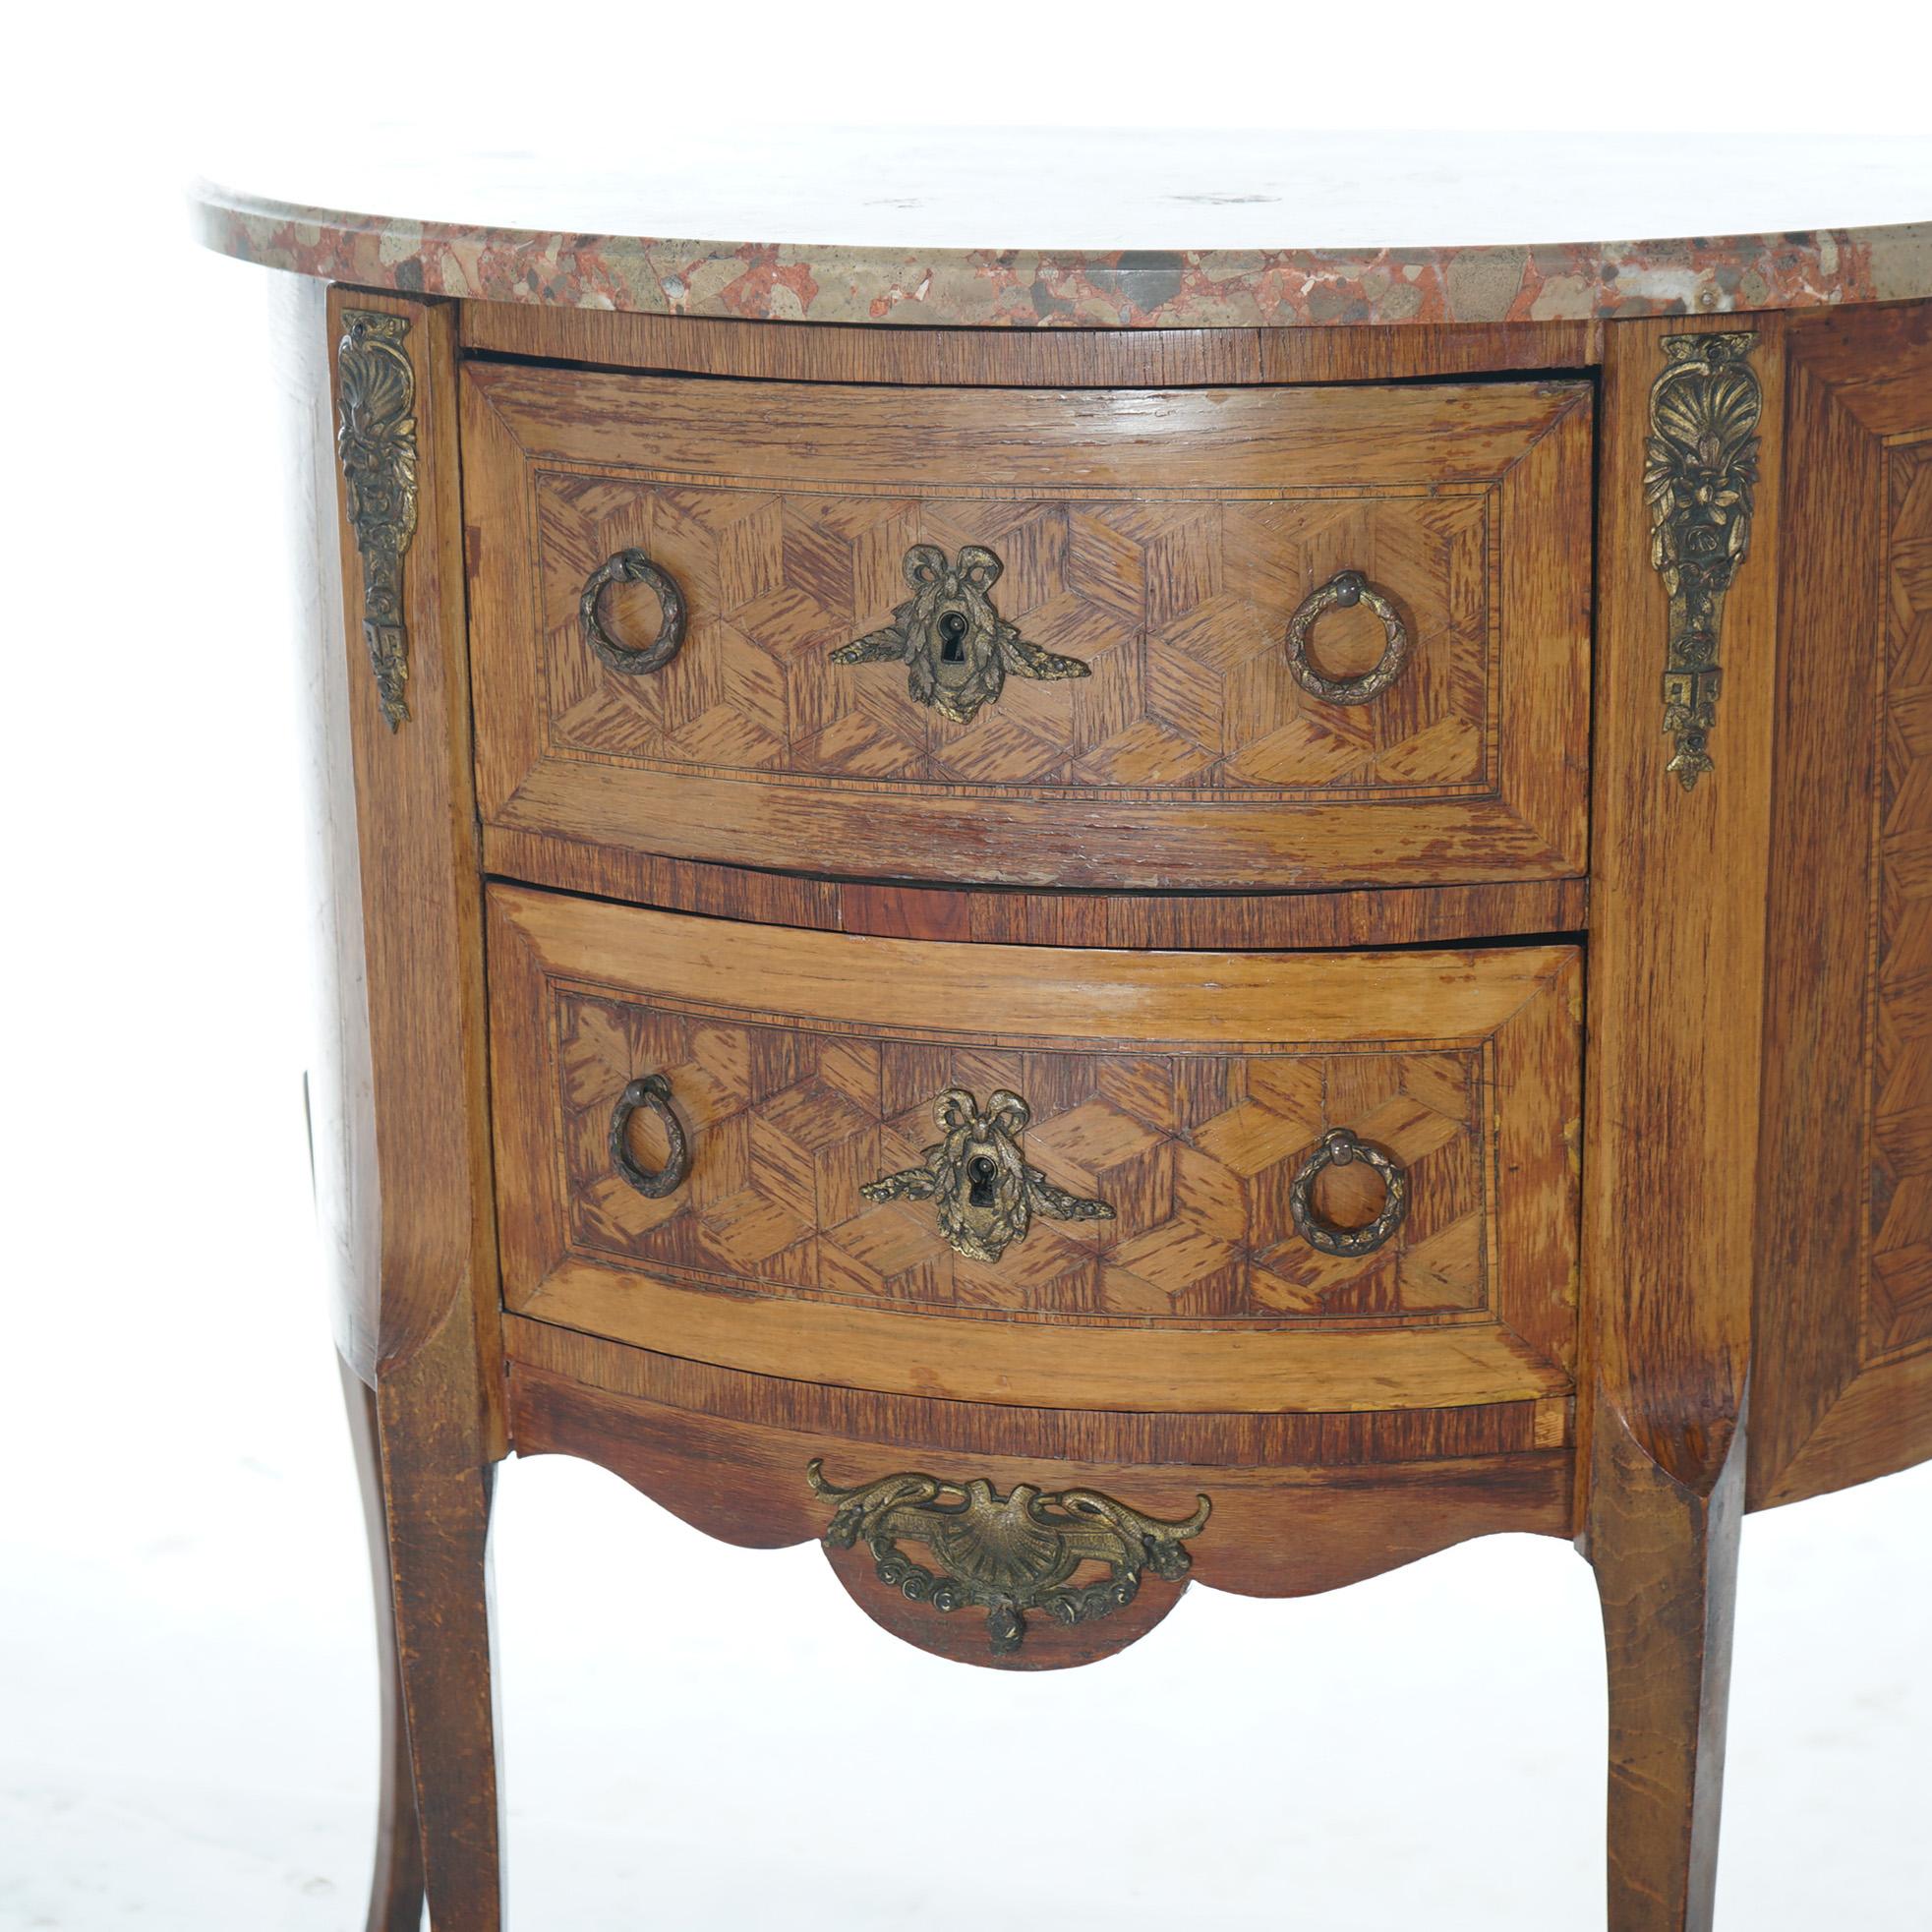 AntiqueFrench Demilune Kingwood, Satinwood & Spécimen Marble Side Table c1920 In Good Condition For Sale In Big Flats, NY